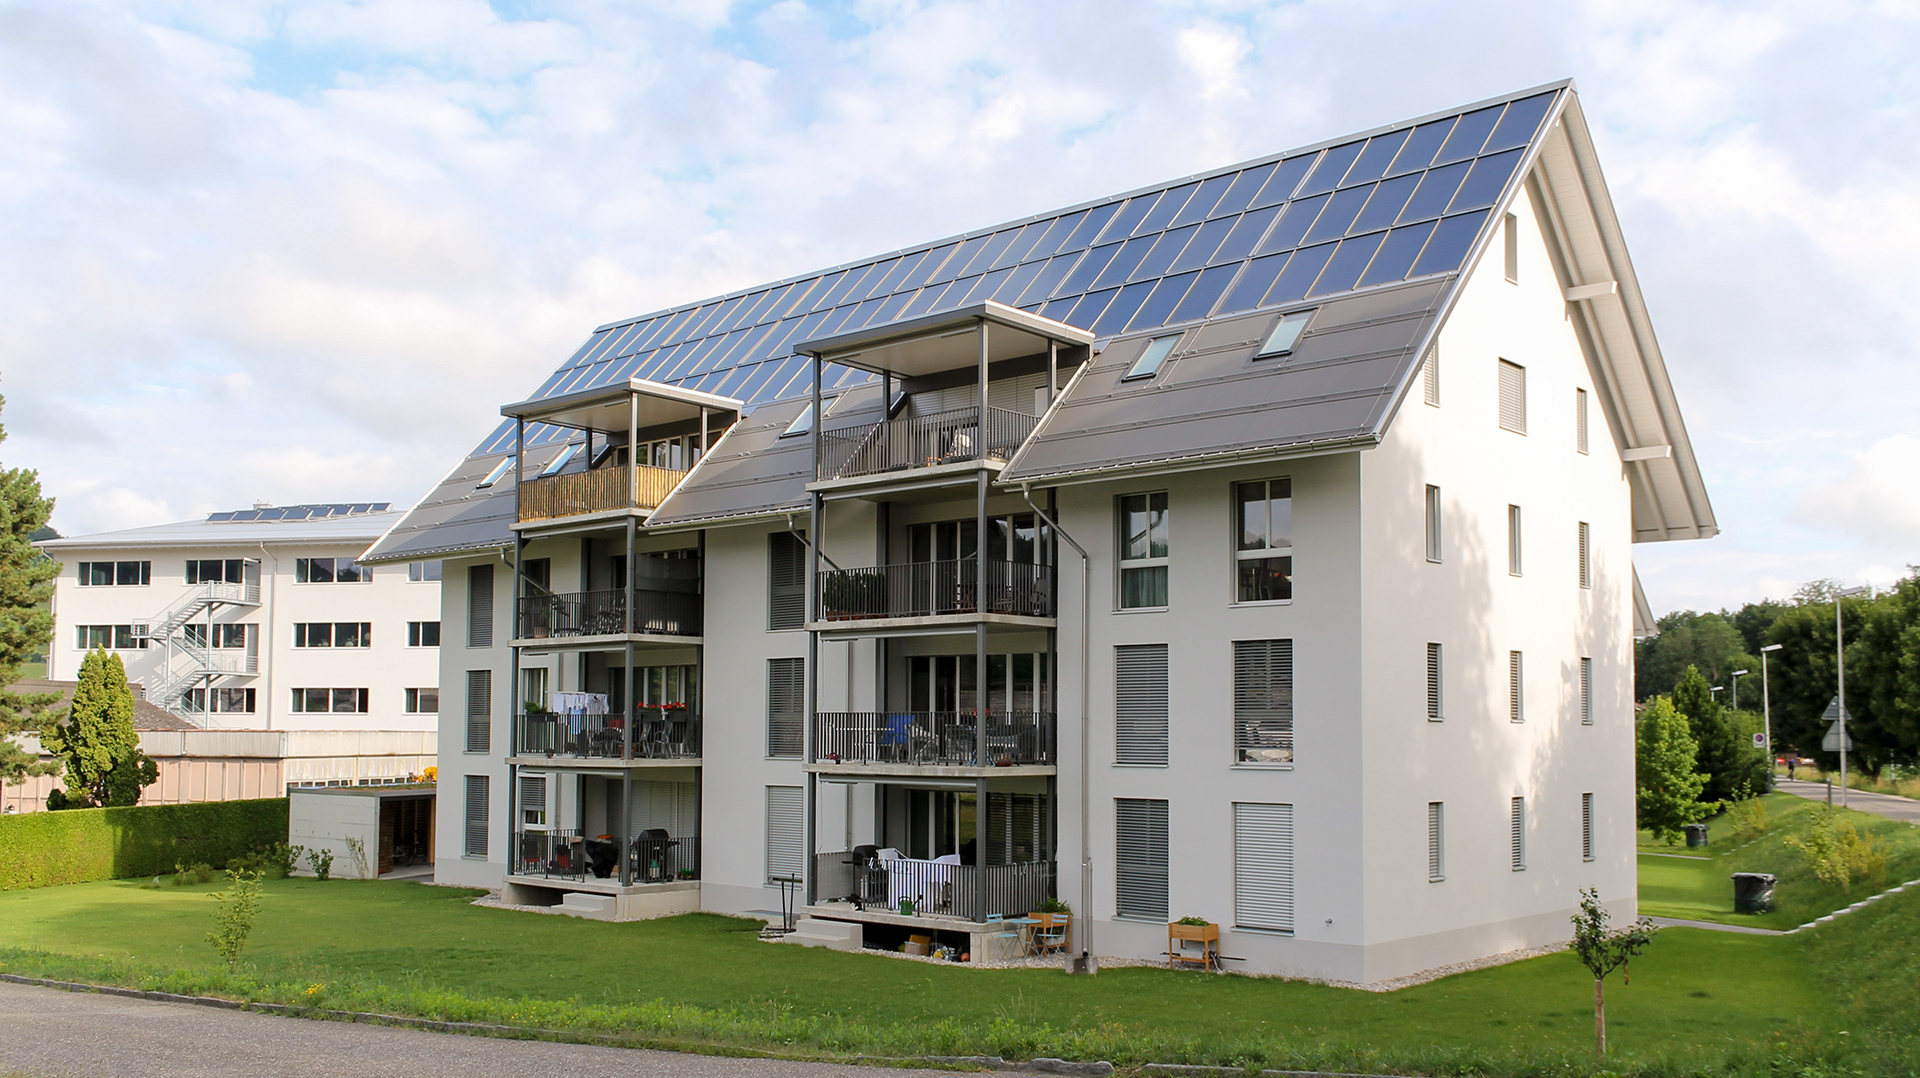 Apartment building with solar system on roof